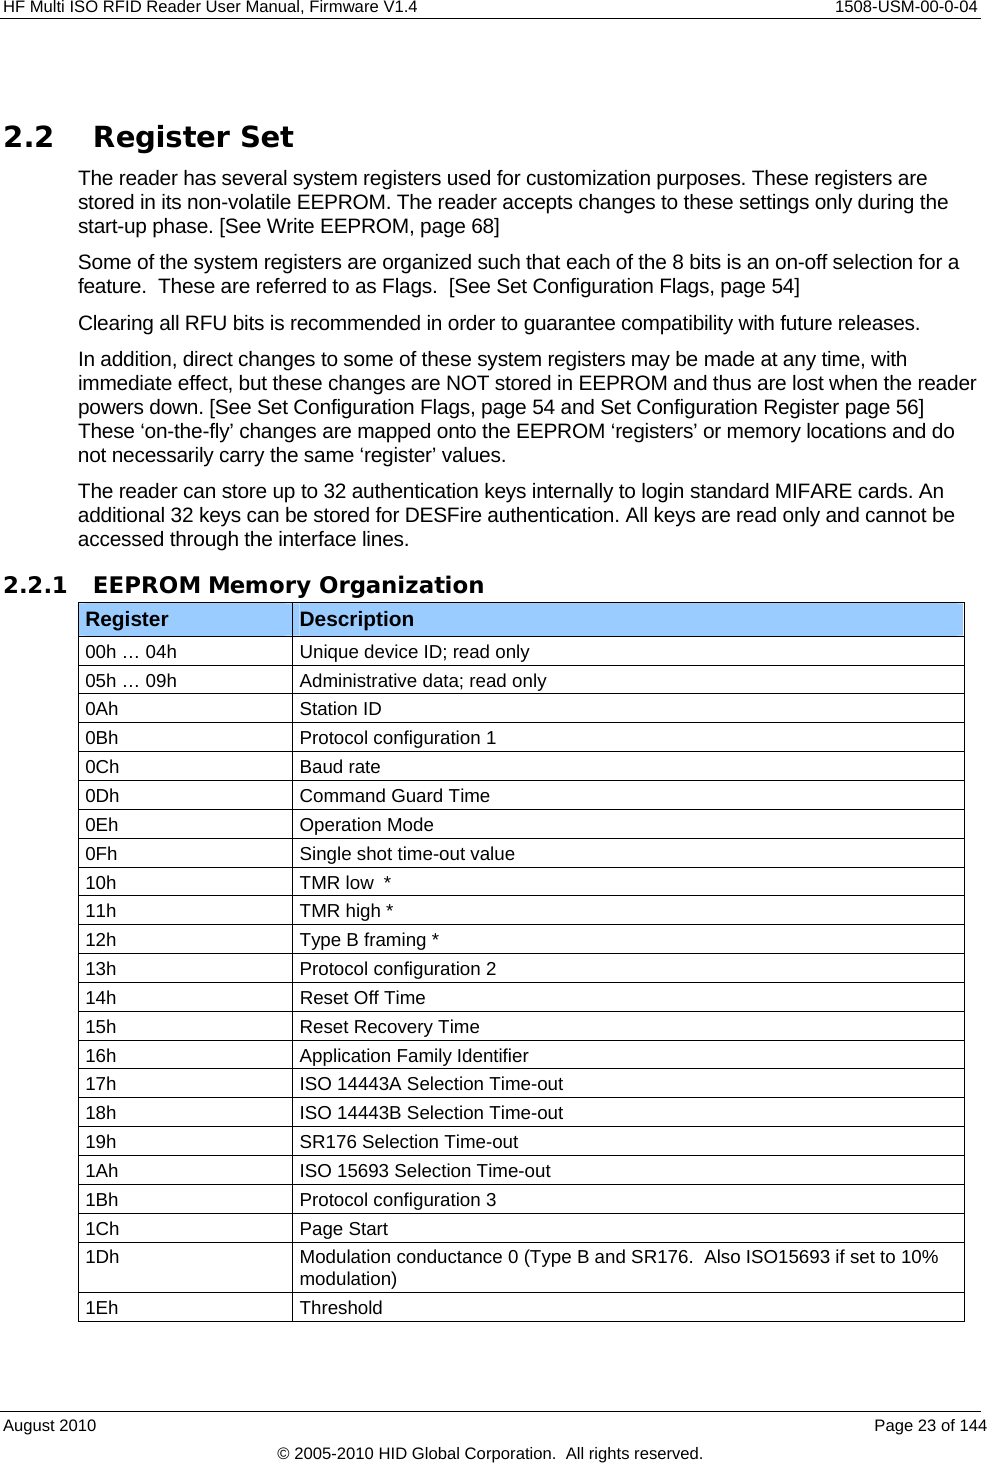  HF Multi ISO RFID Reader User Manual, Firmware V1.4    1508-USM-00-0-04  2.2 Register Set The reader has several system registers used for customization purposes. These registers are stored in its non-volatile EEPROM. The reader accepts changes to these settings only during the start-up phase. [See Write EEPROM, page 68]    Some of the system registers are organized such that each of the 8 bits is an on-off selection for a feature.  These are referred to as Flags.  [See Set Configuration Flags, page 54] Clearing all RFU bits is recommended in order to guarantee compatibility with future releases. In addition, direct changes to some of these system registers may be made at any time, with immediate effect, but these changes are NOT stored in EEPROM and thus are lost when the reader powers down. [See Set Configuration Flags, page 54 and Set Configuration Register page 56]   These ‘on-the-fly’ changes are mapped onto the EEPROM ‘registers’ or memory locations and do not necessarily carry the same ‘register’ values. The reader can store up to 32 authentication keys internally to login standard MIFARE cards. An additional 32 keys can be stored for DESFire authentication. All keys are read only and cannot be accessed through the interface lines. 2.2.1 EEPROM Memory Organization Register  Description 00h … 04h  Unique device ID; read only 05h … 09h  Administrative data; read only 0Ah Station ID 0Bh  Protocol configuration 1 0Ch Baud rate 0Dh  Command Guard Time 0Eh Operation Mode 0Fh  Single shot time-out value 10h  TMR low  * 11h  TMR high * 12h  Type B framing * 13h  Protocol configuration 2 14h Reset Off Time 15h  Reset Recovery Time 16h  Application Family Identifier 17h  ISO 14443A Selection Time-out 18h  ISO 14443B Selection Time-out 19h  SR176 Selection Time-out 1Ah  ISO 15693 Selection Time-out 1Bh  Protocol configuration 3 1Ch Page Start 1Dh  Modulation conductance 0 (Type B and SR176.  Also ISO15693 if set to 10% modulation) 1Eh Threshold August 2010    Page 23 of 144 © 2005-2010 HID Global Corporation.  All rights reserved. 